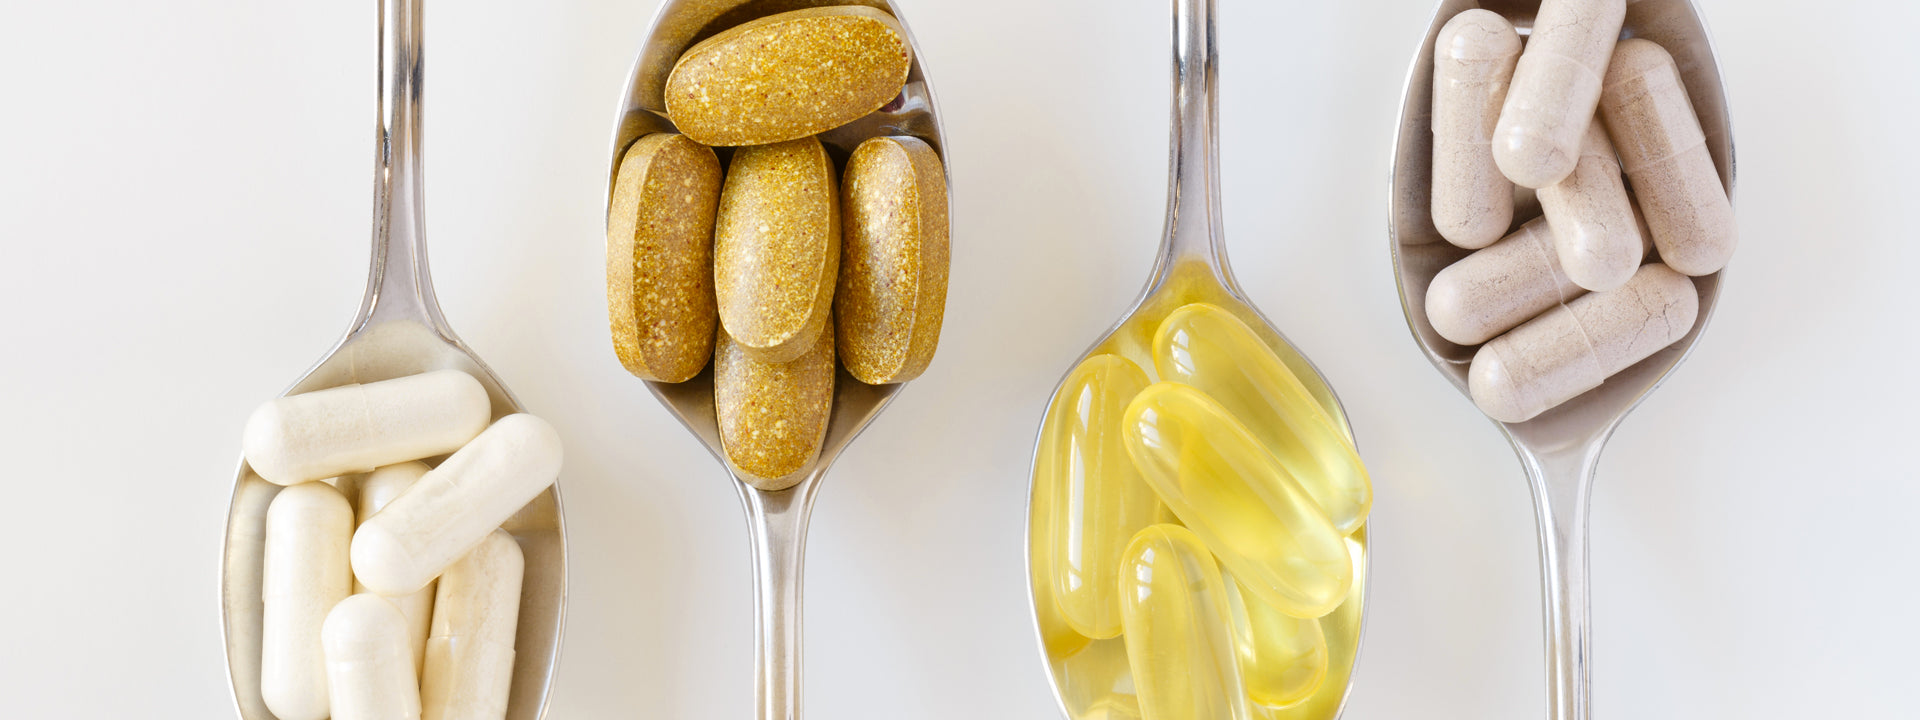 Why Do Supplements Cause Urine to Turn Neon Yellow?